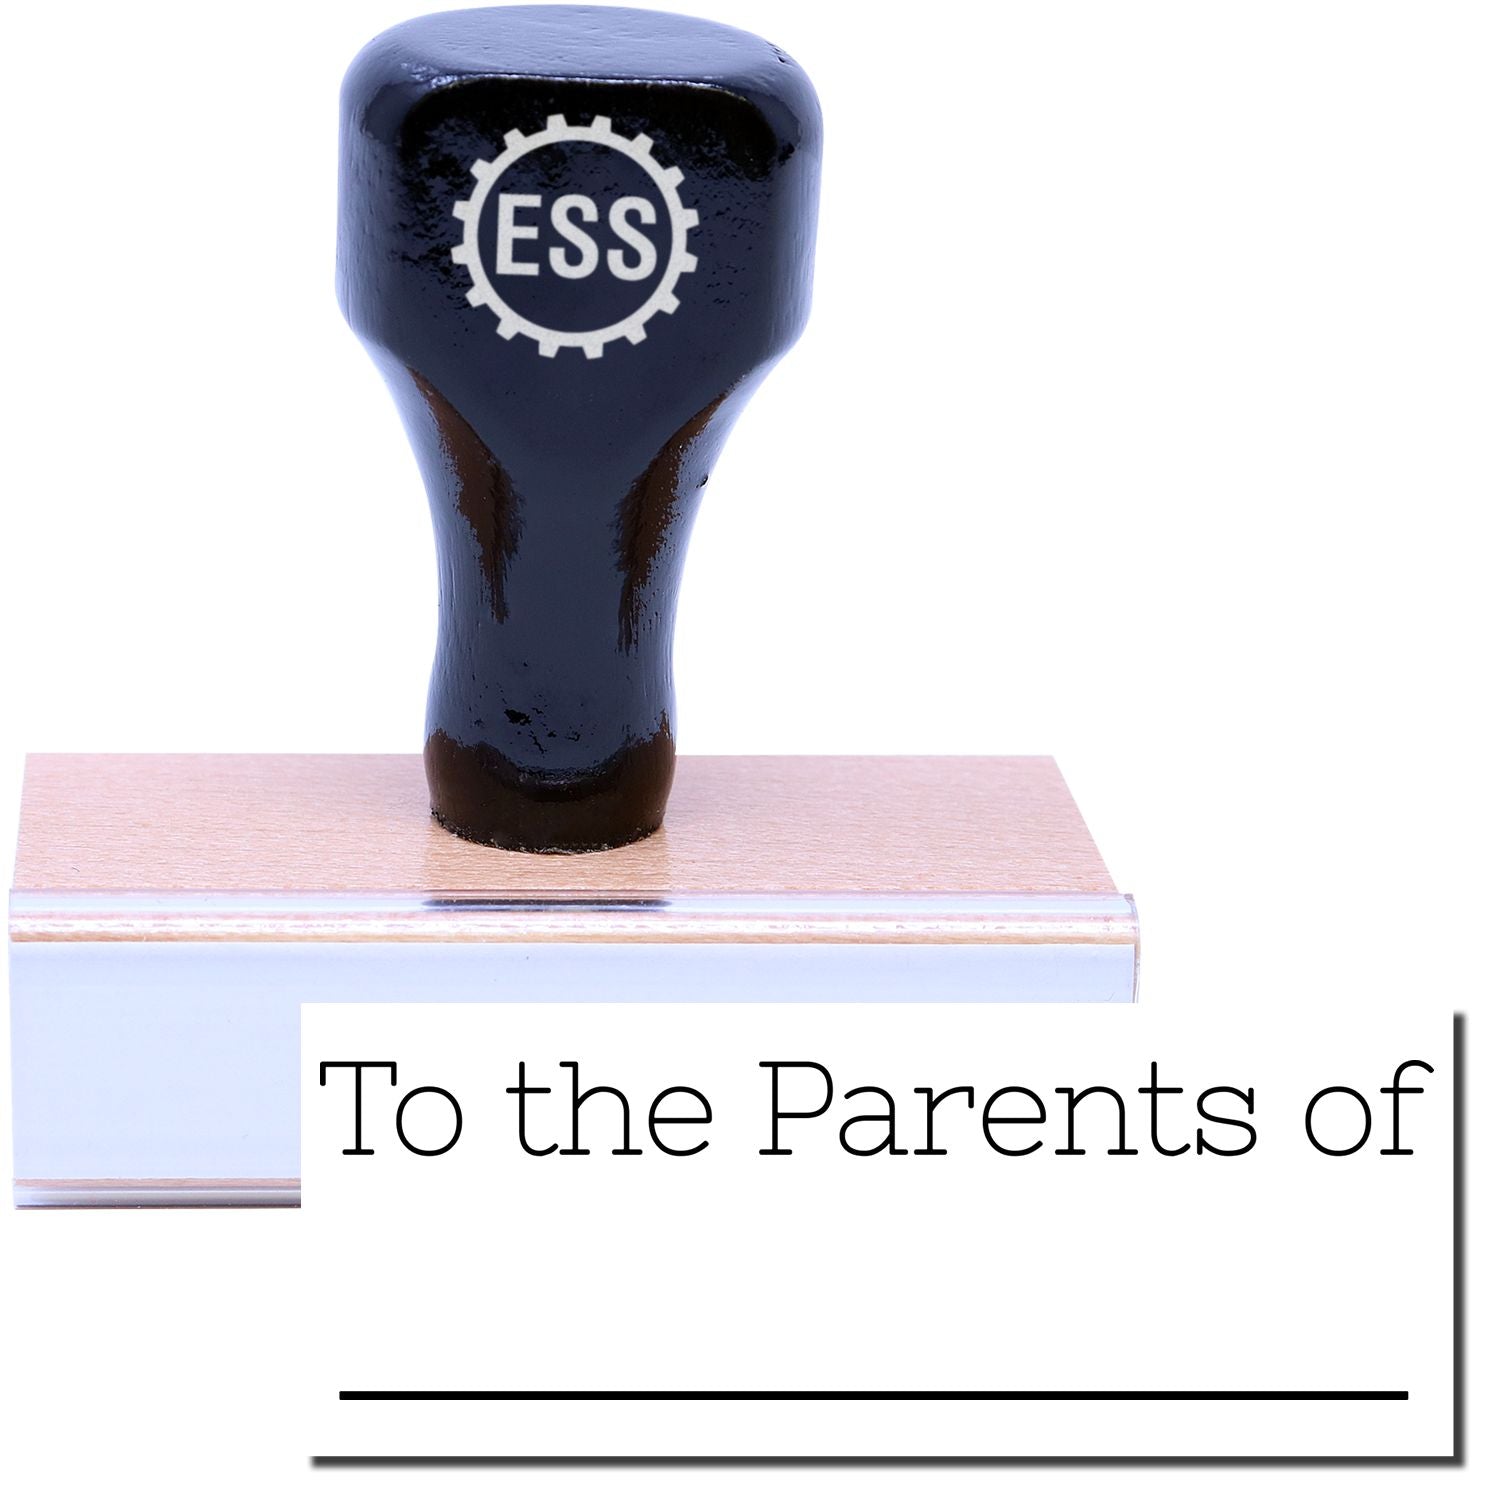 A stock office rubber stamp with a stamped image showing how the text "To the Parents of" in a large skinny font with a line underneath the text is displayed after stamping.